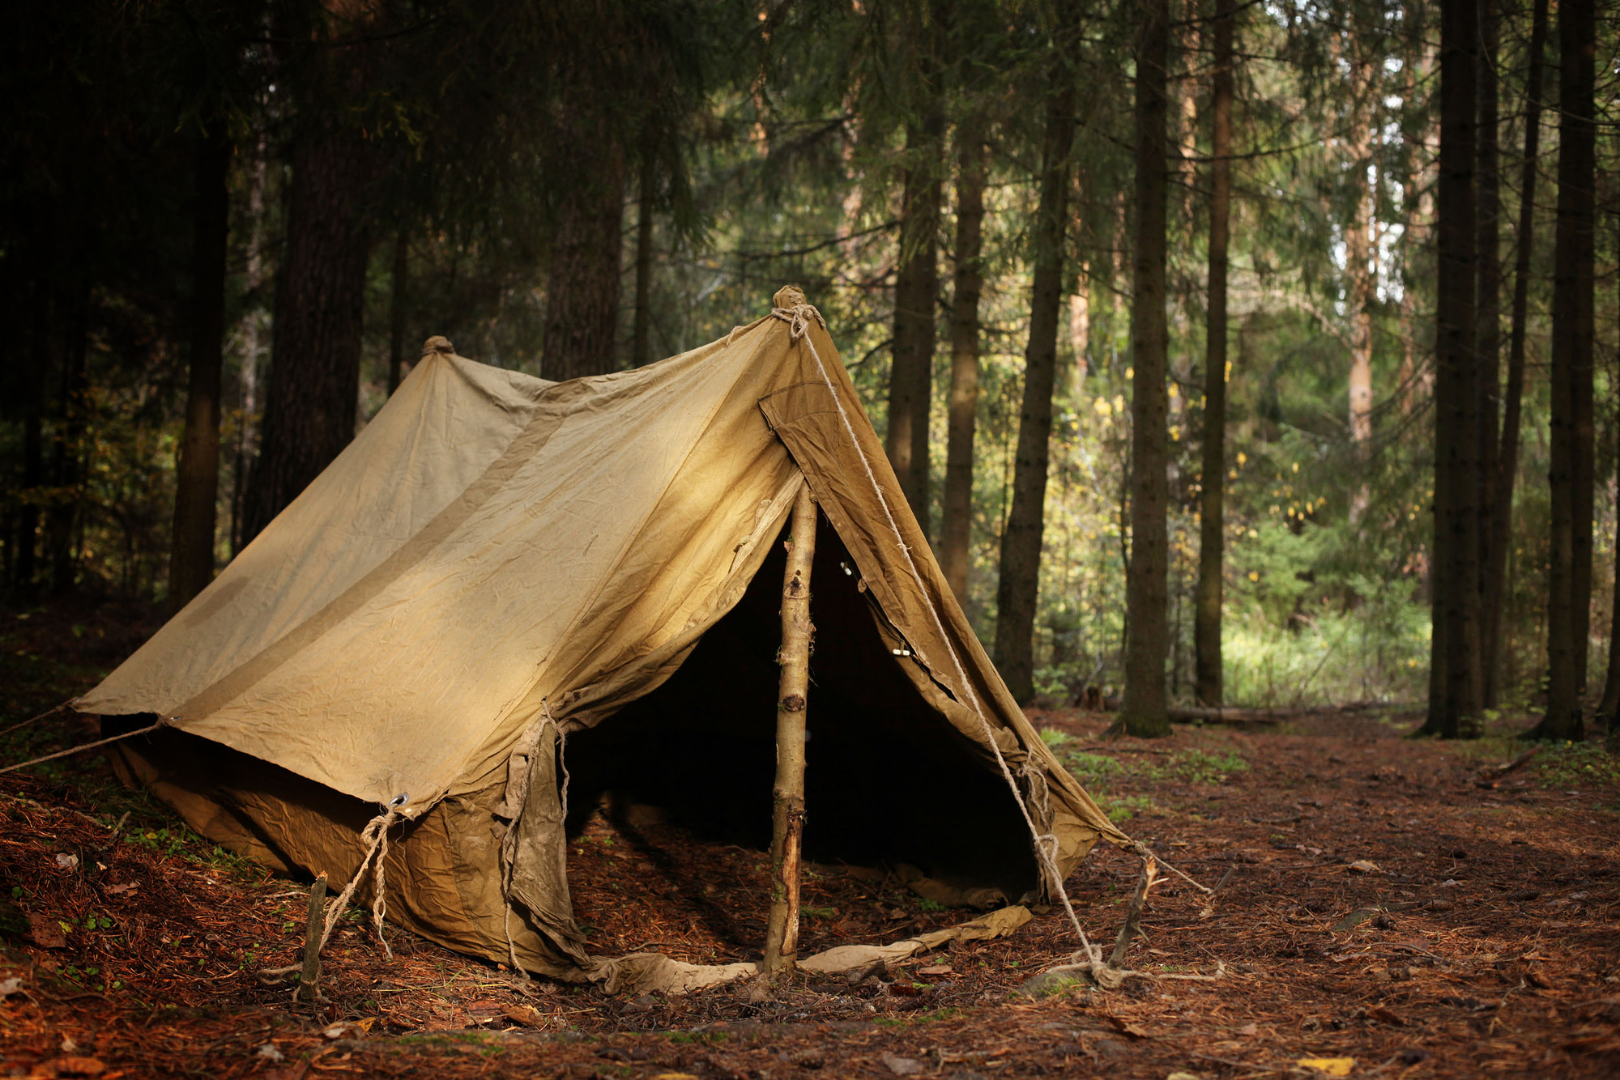 bushcraft camping with a tent shelter